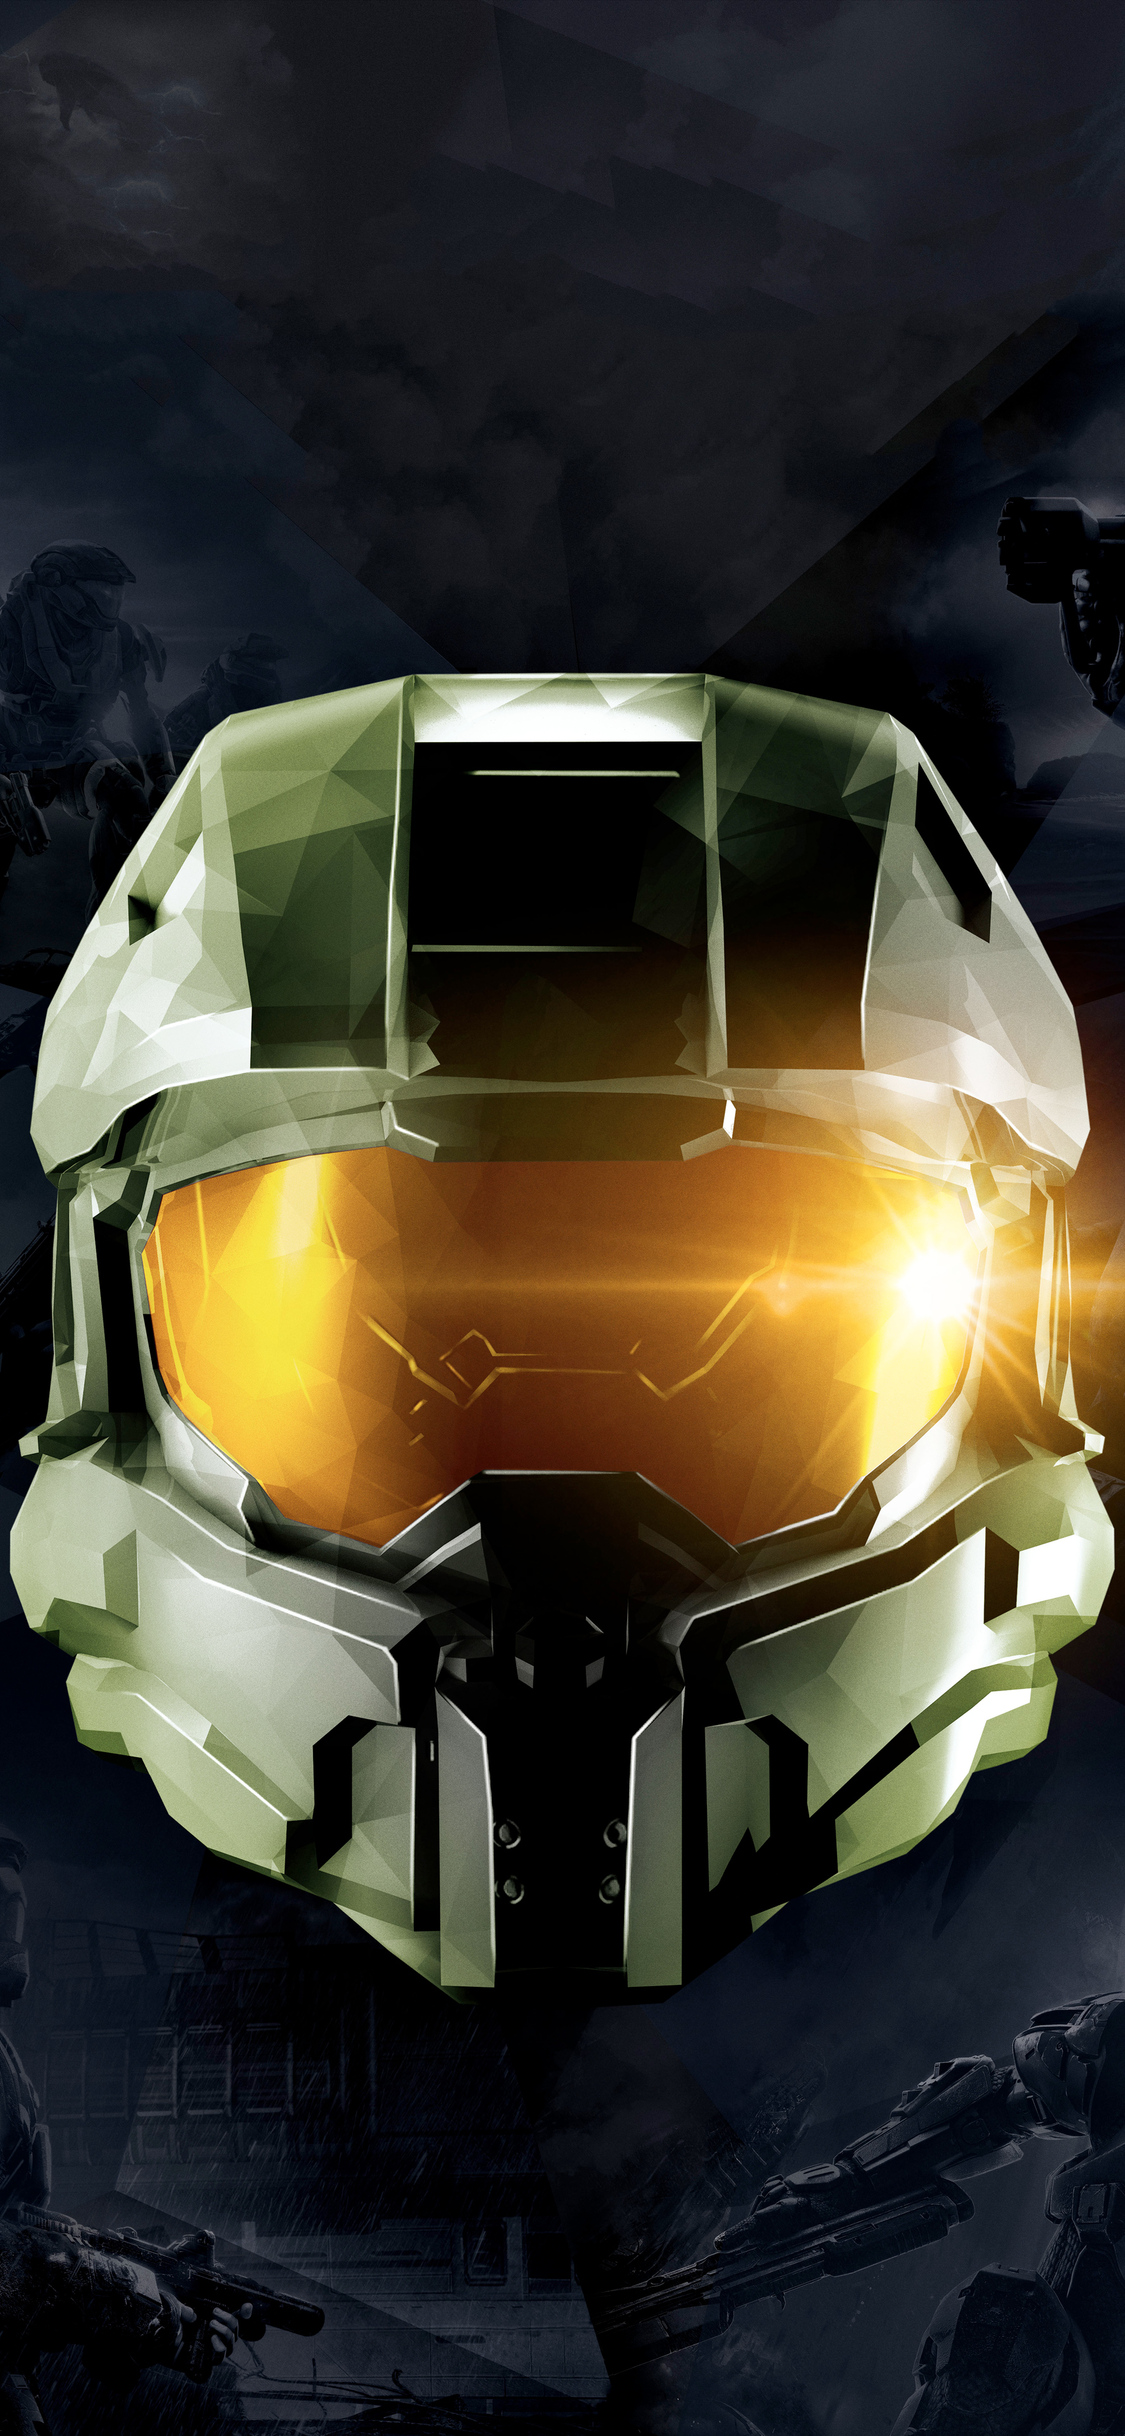 Halo master chief русификаторы. Halo: the Master Chief collection. Halo мастер Чиф collection. Halo 4 Master Chief collection. Halo - the Master Chief collection иконка.